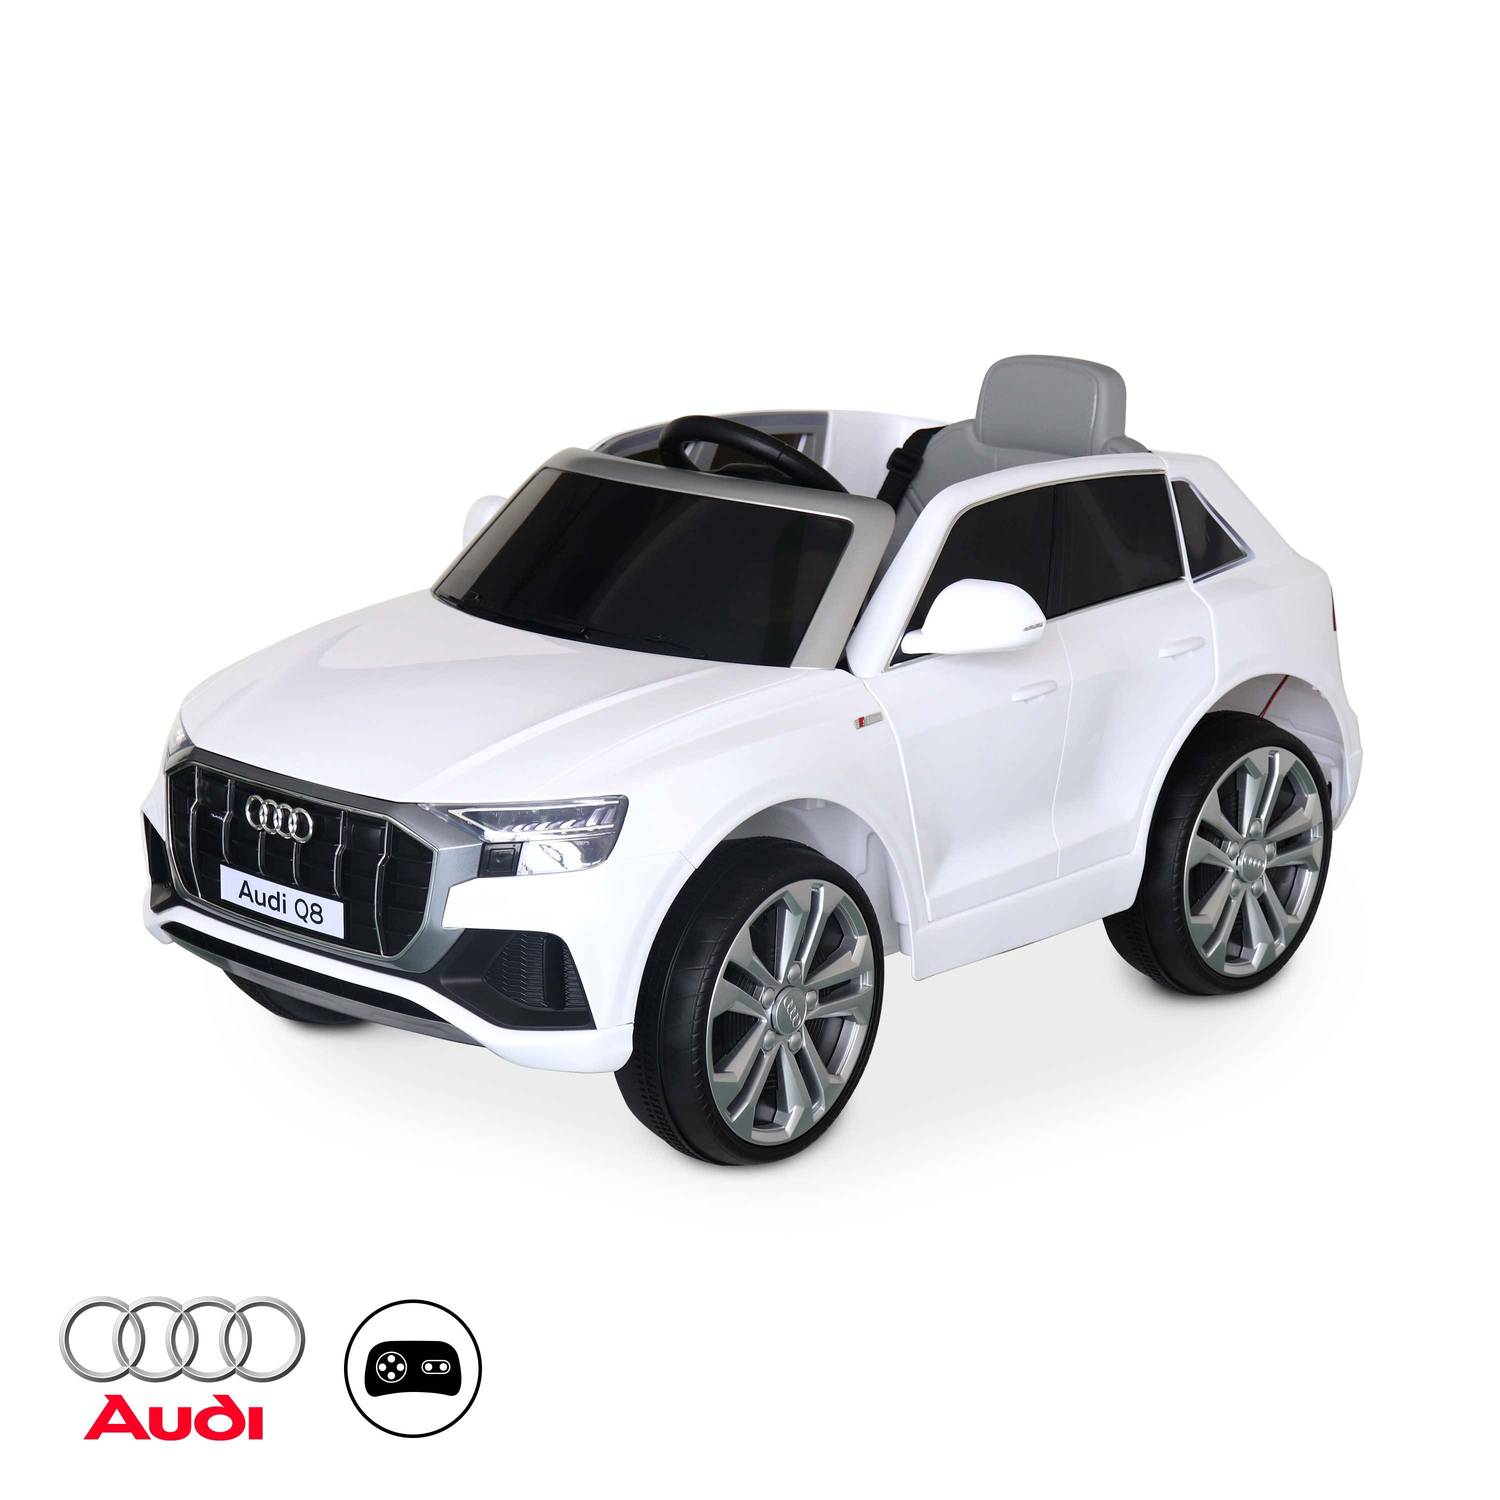 Children's electric car 12V, 1 seat with car radio and remote control - AUDI Q8 - White Photo1